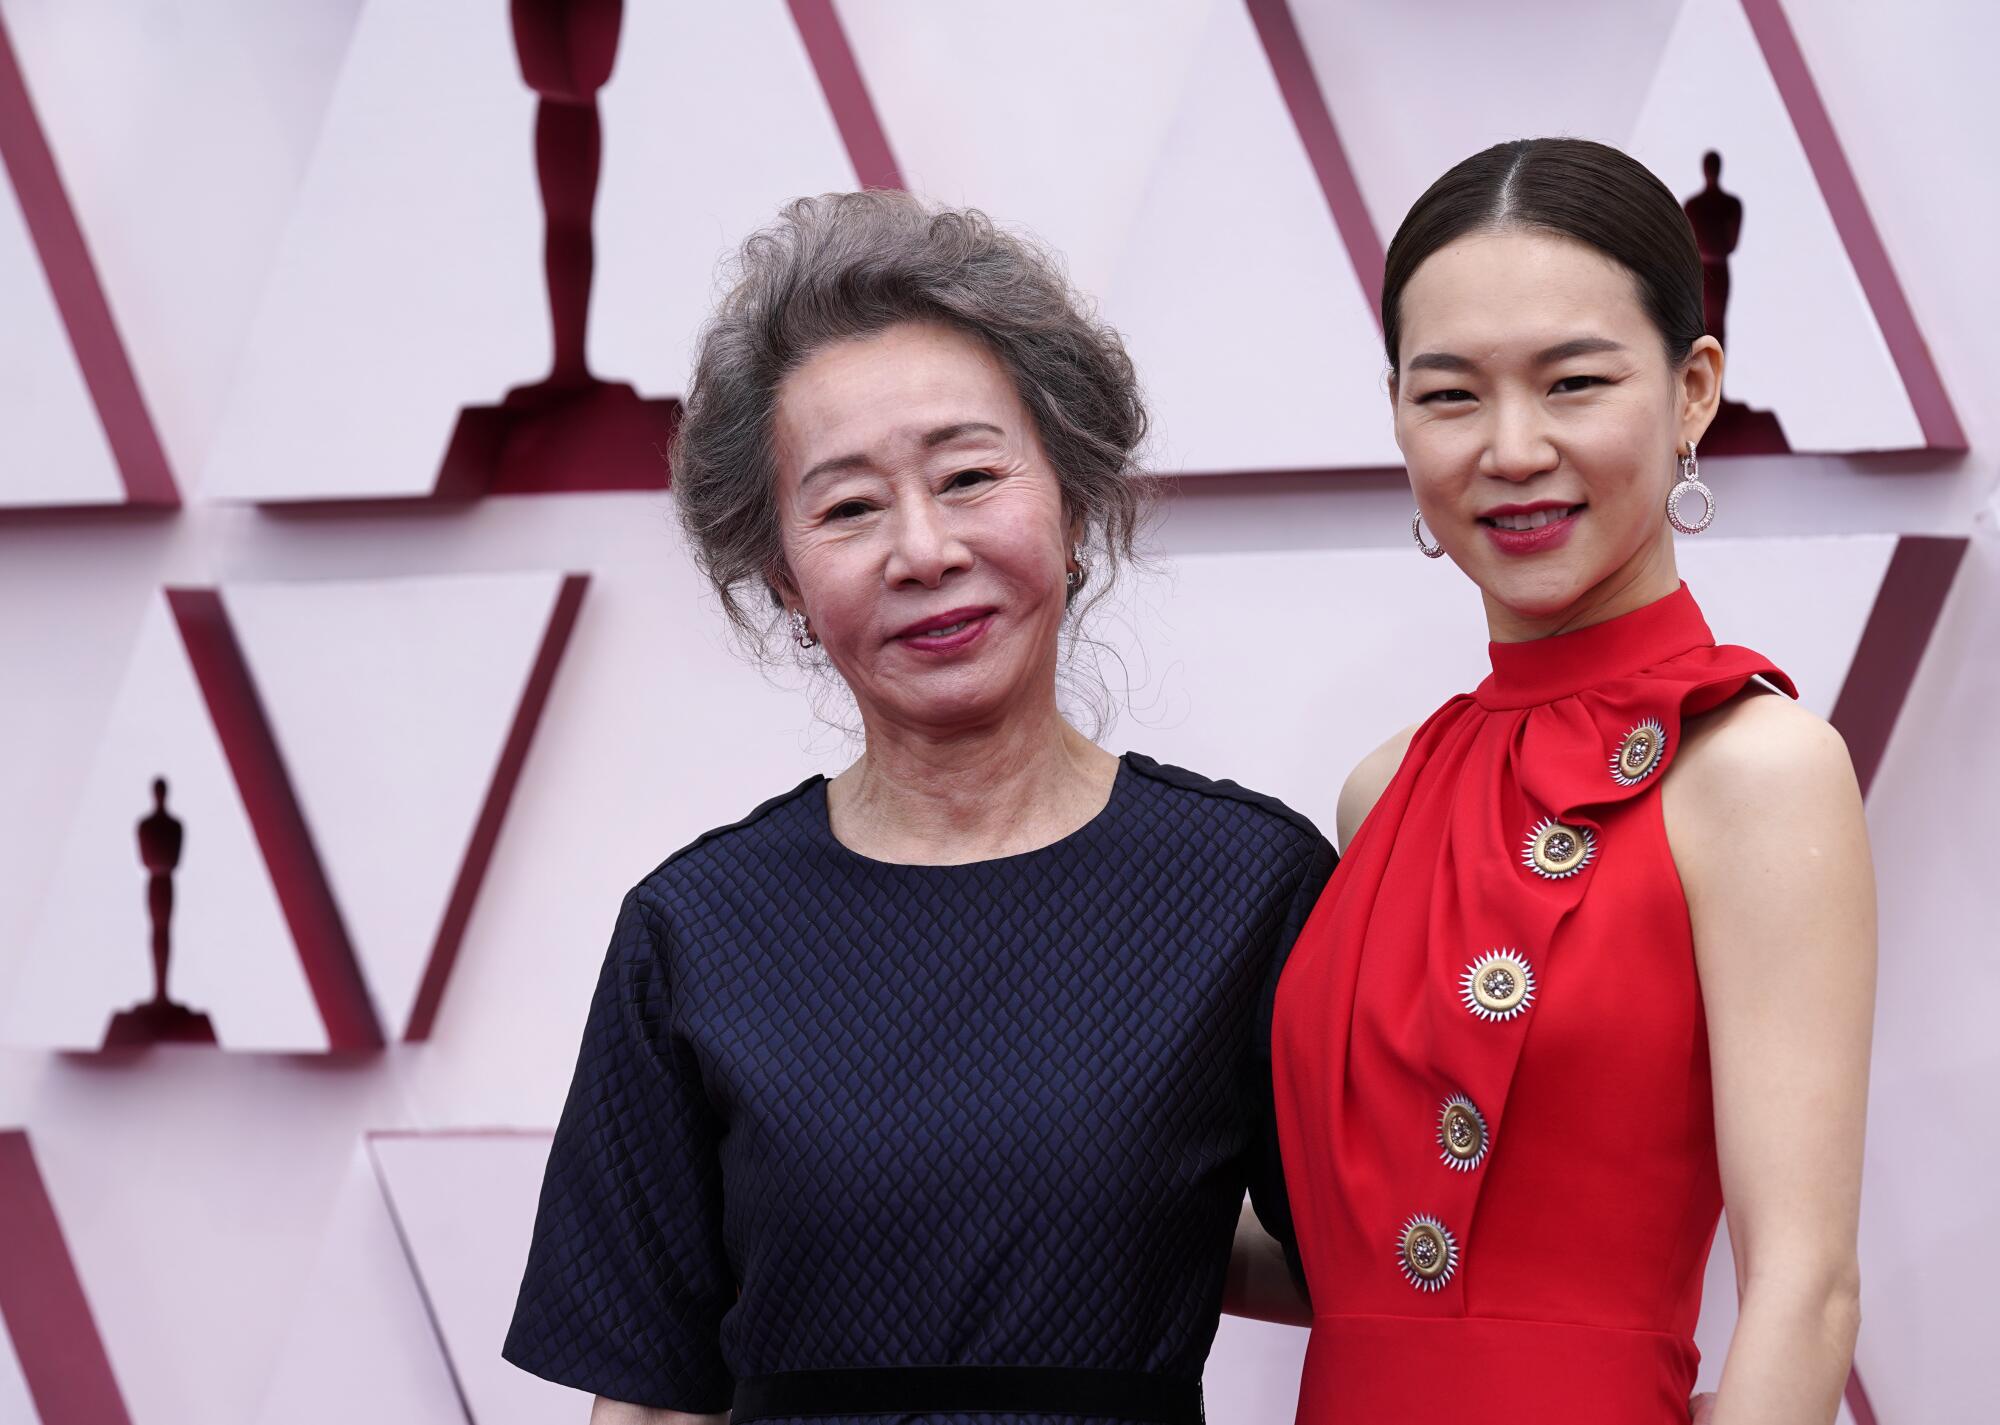 Yuh-Jung Youn wears a dark dress, and Han Ye-ri wears a high-neck red dress with large buttons